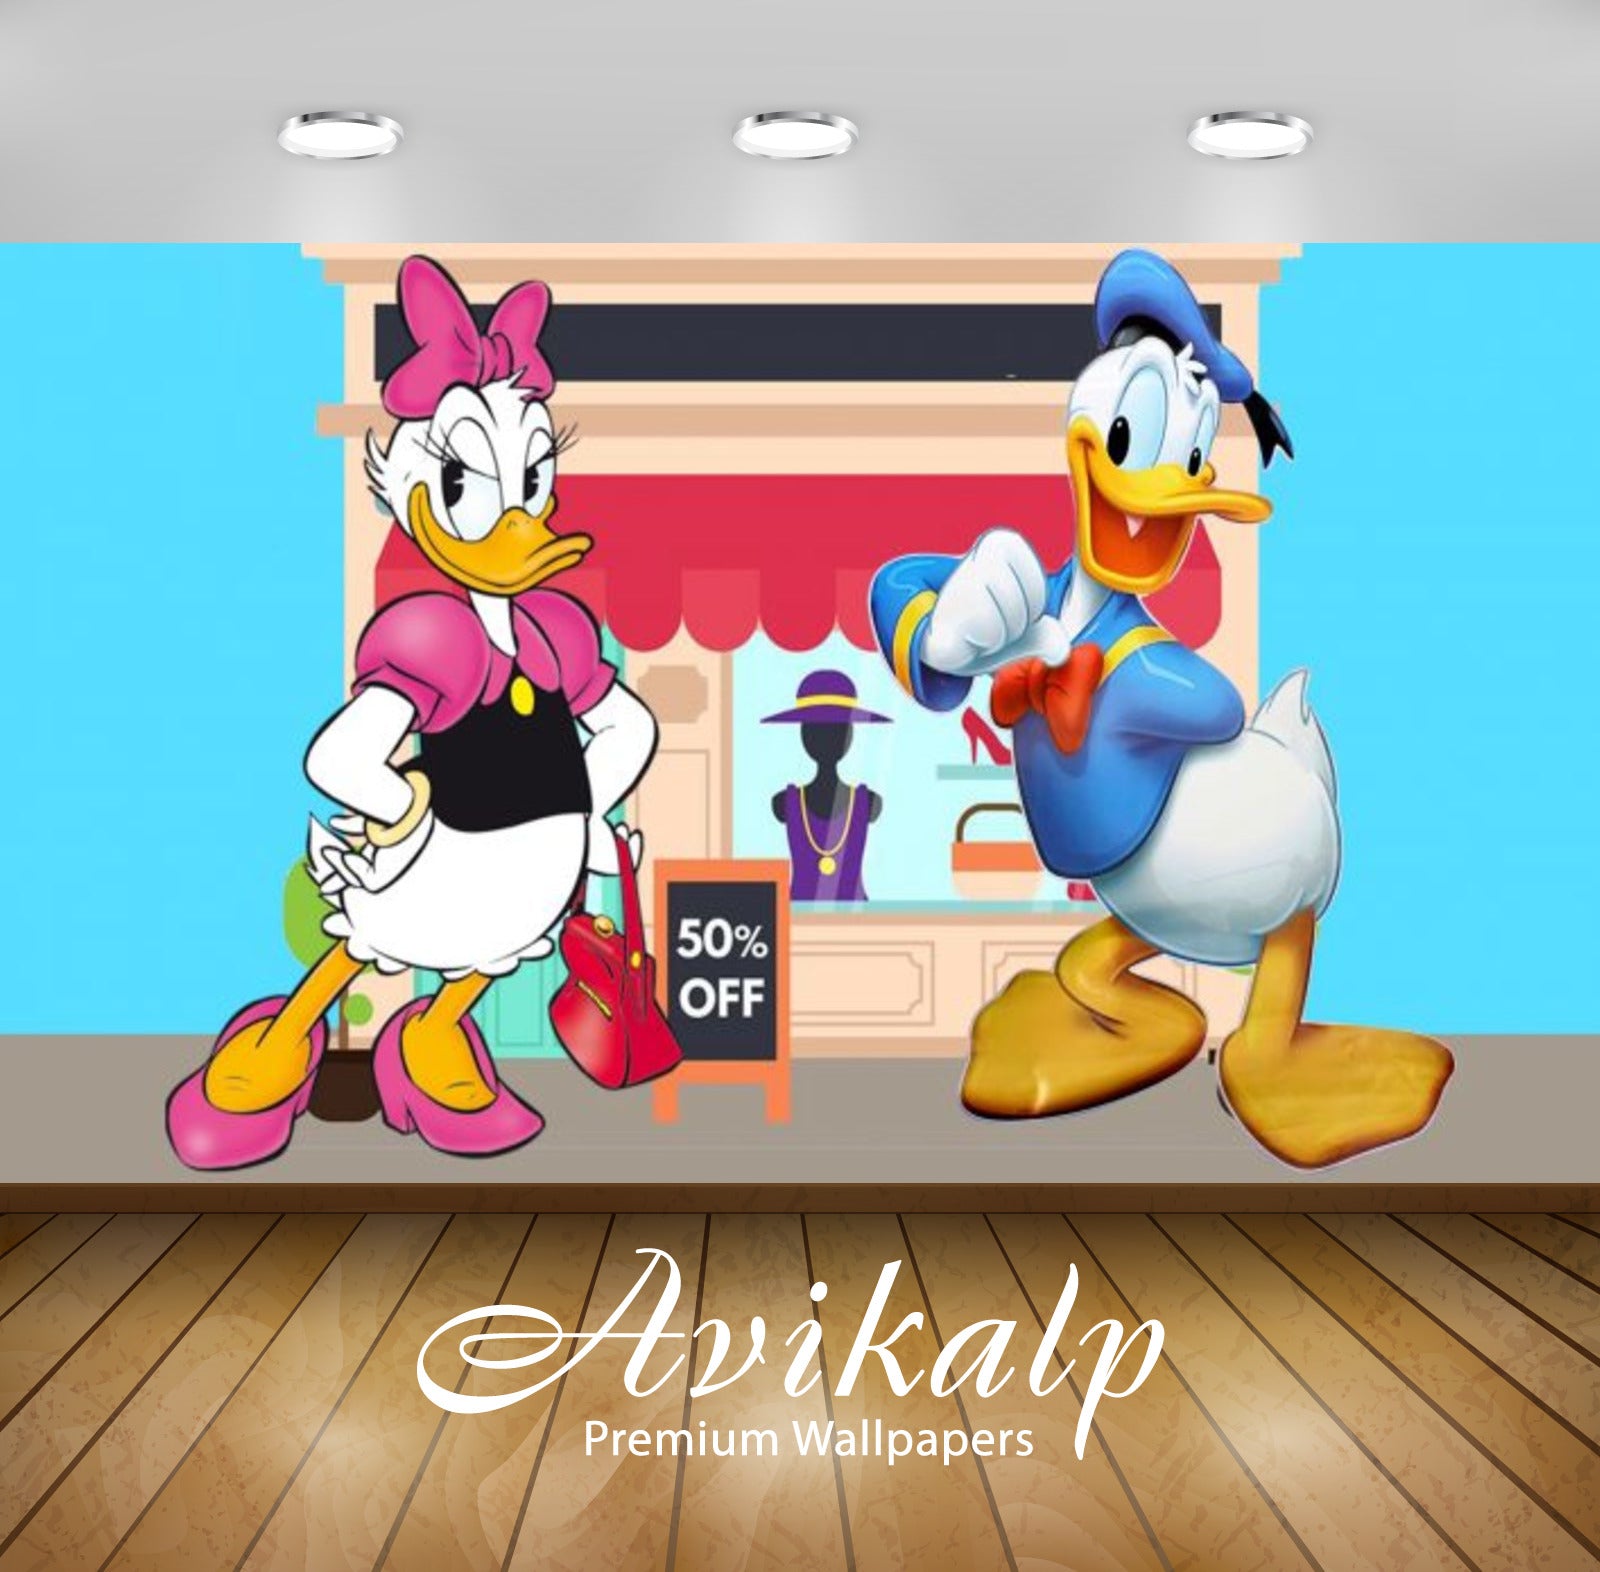 Avikalp Exclusive Awi2068 Donald Duck And Daisy Duck Meeting Romantic Couples  Full HD Wallpapers fo